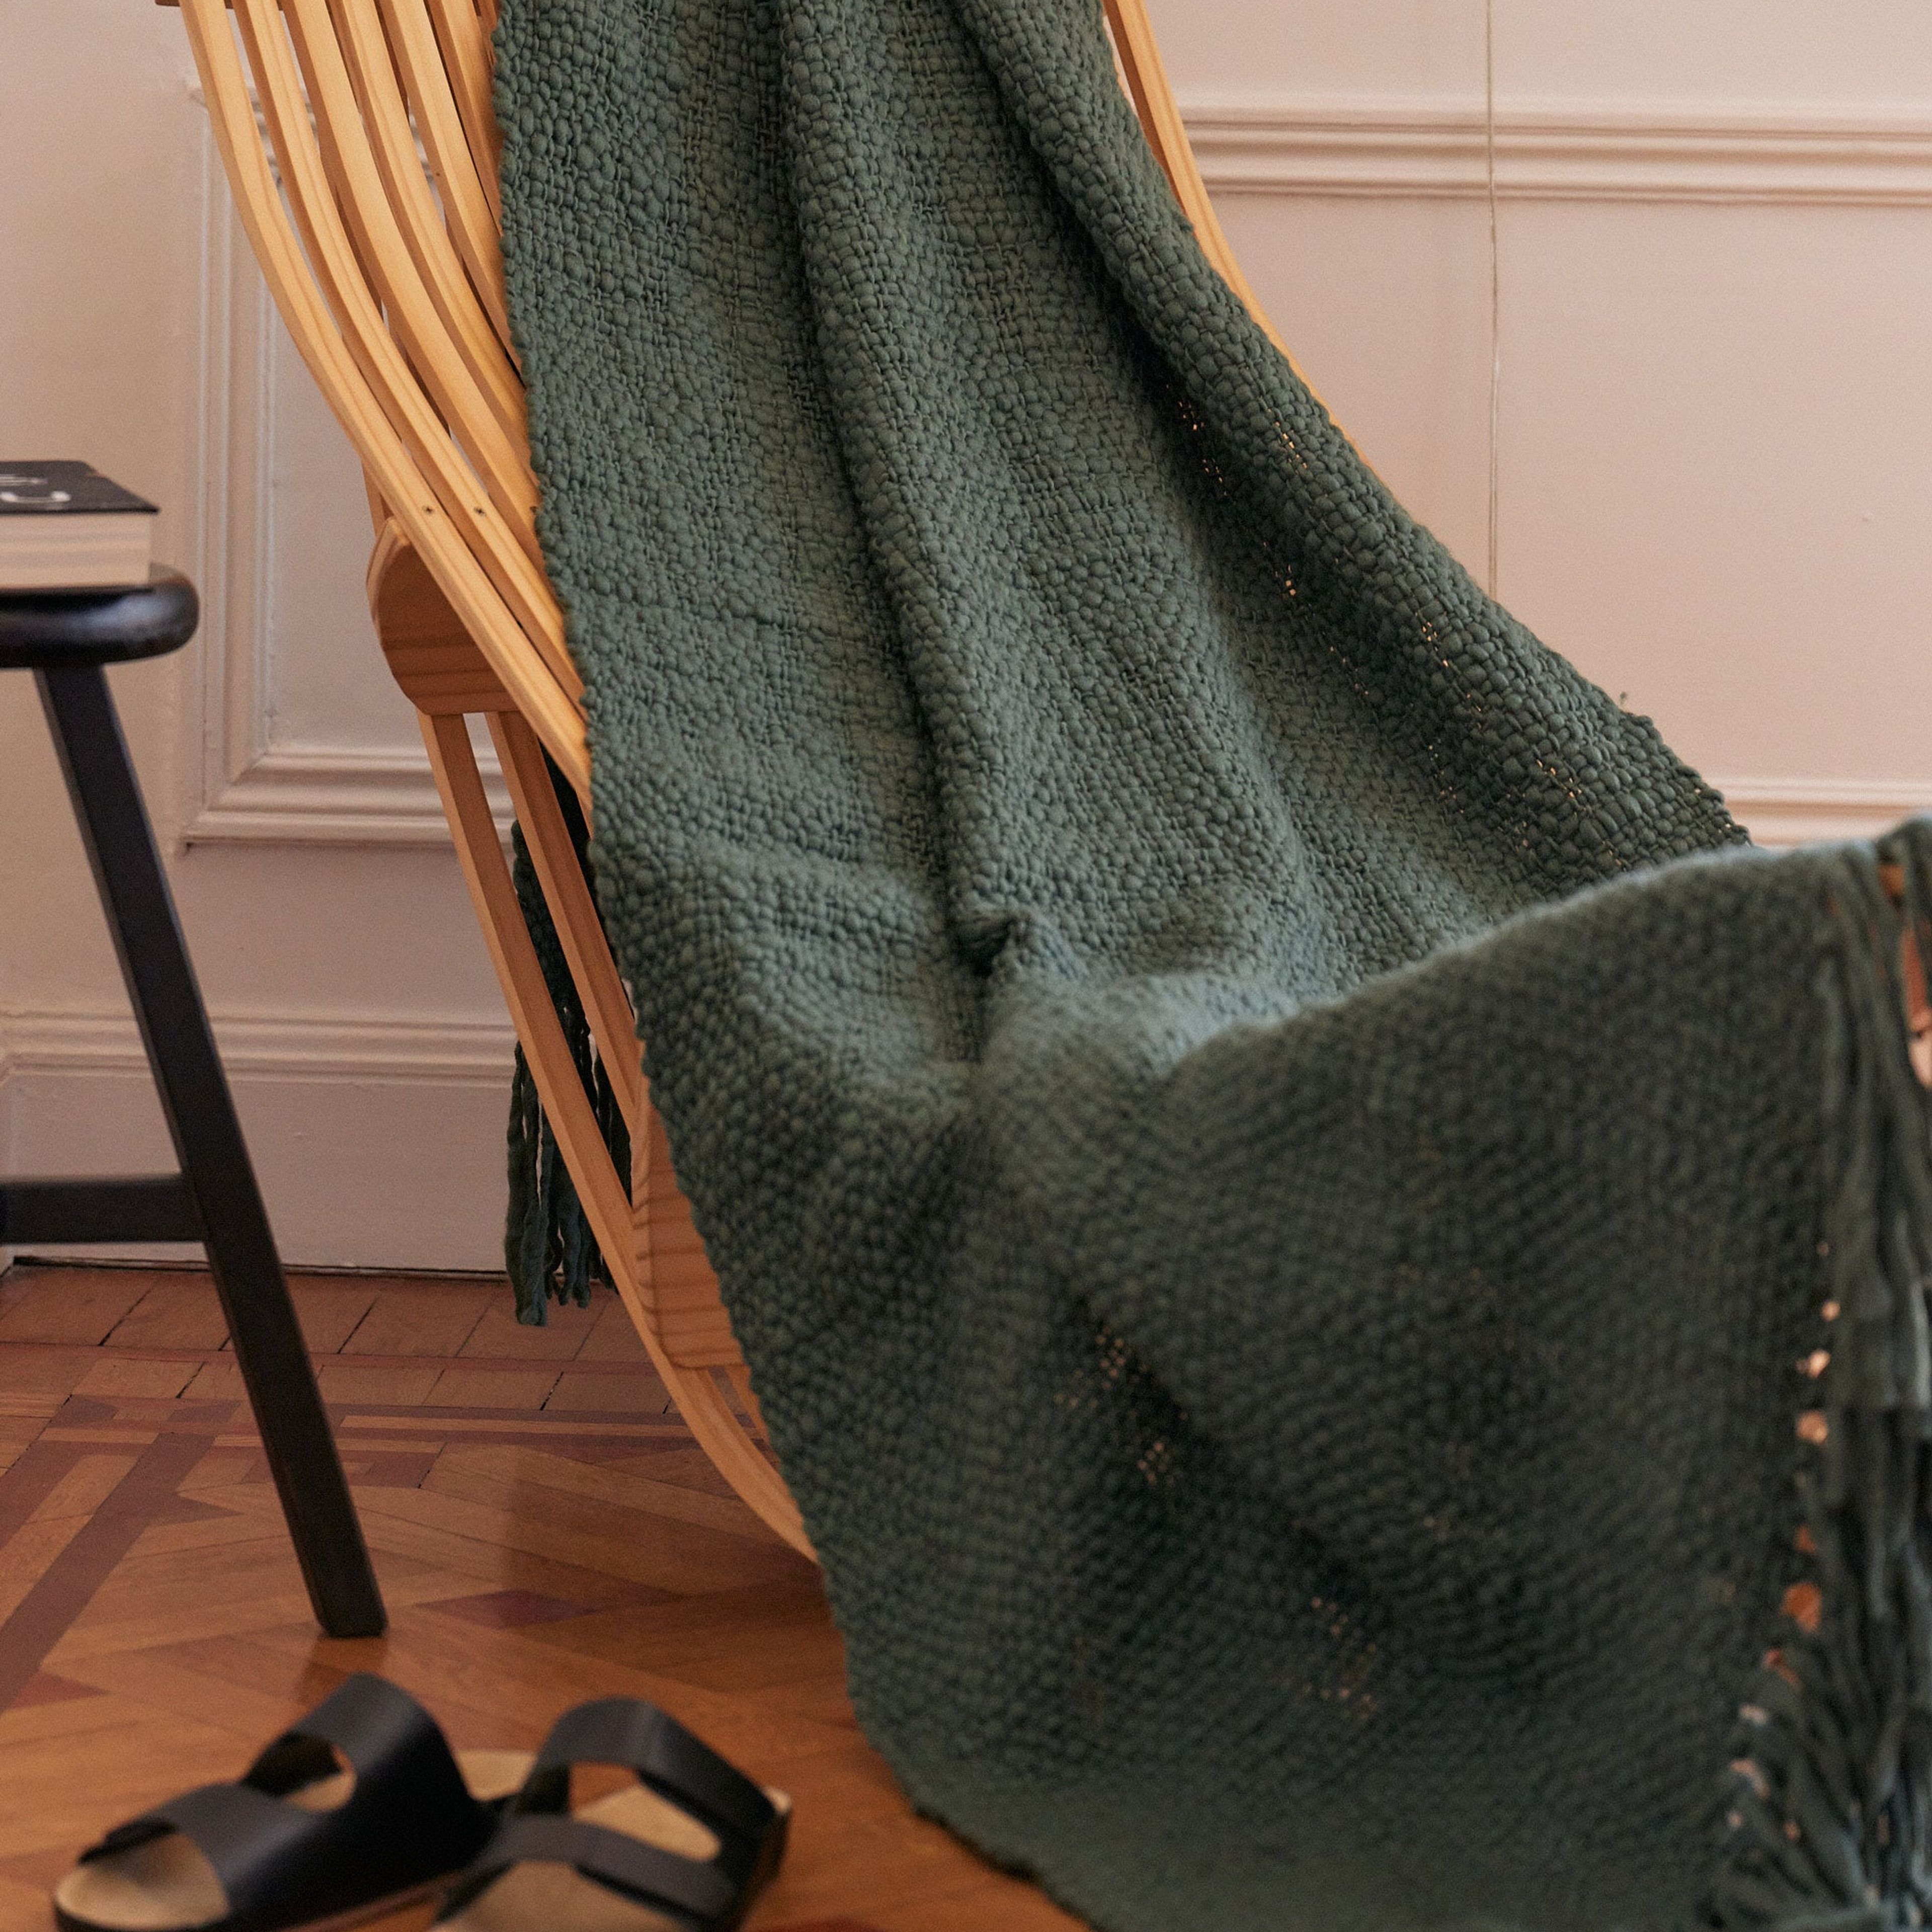 Luxurious Olive Green Wool Blanket - Handwoven with Merino Wool for Ultimate Comfort and Style